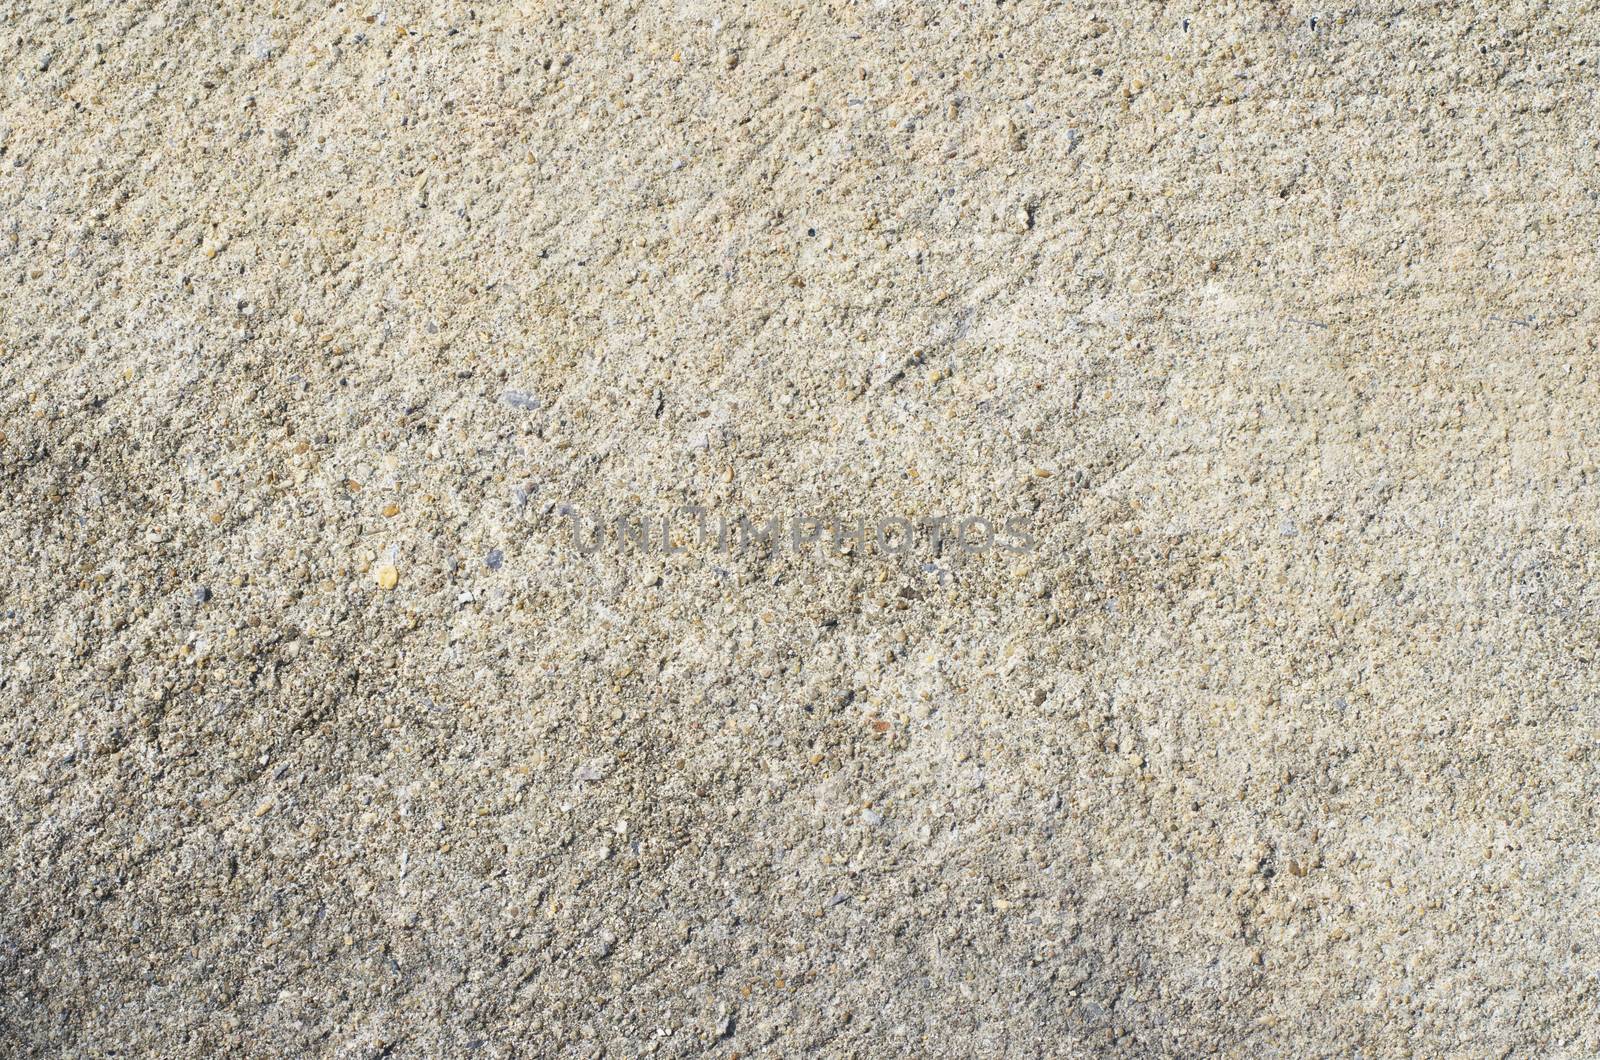 Cement concrete surface background by phochi